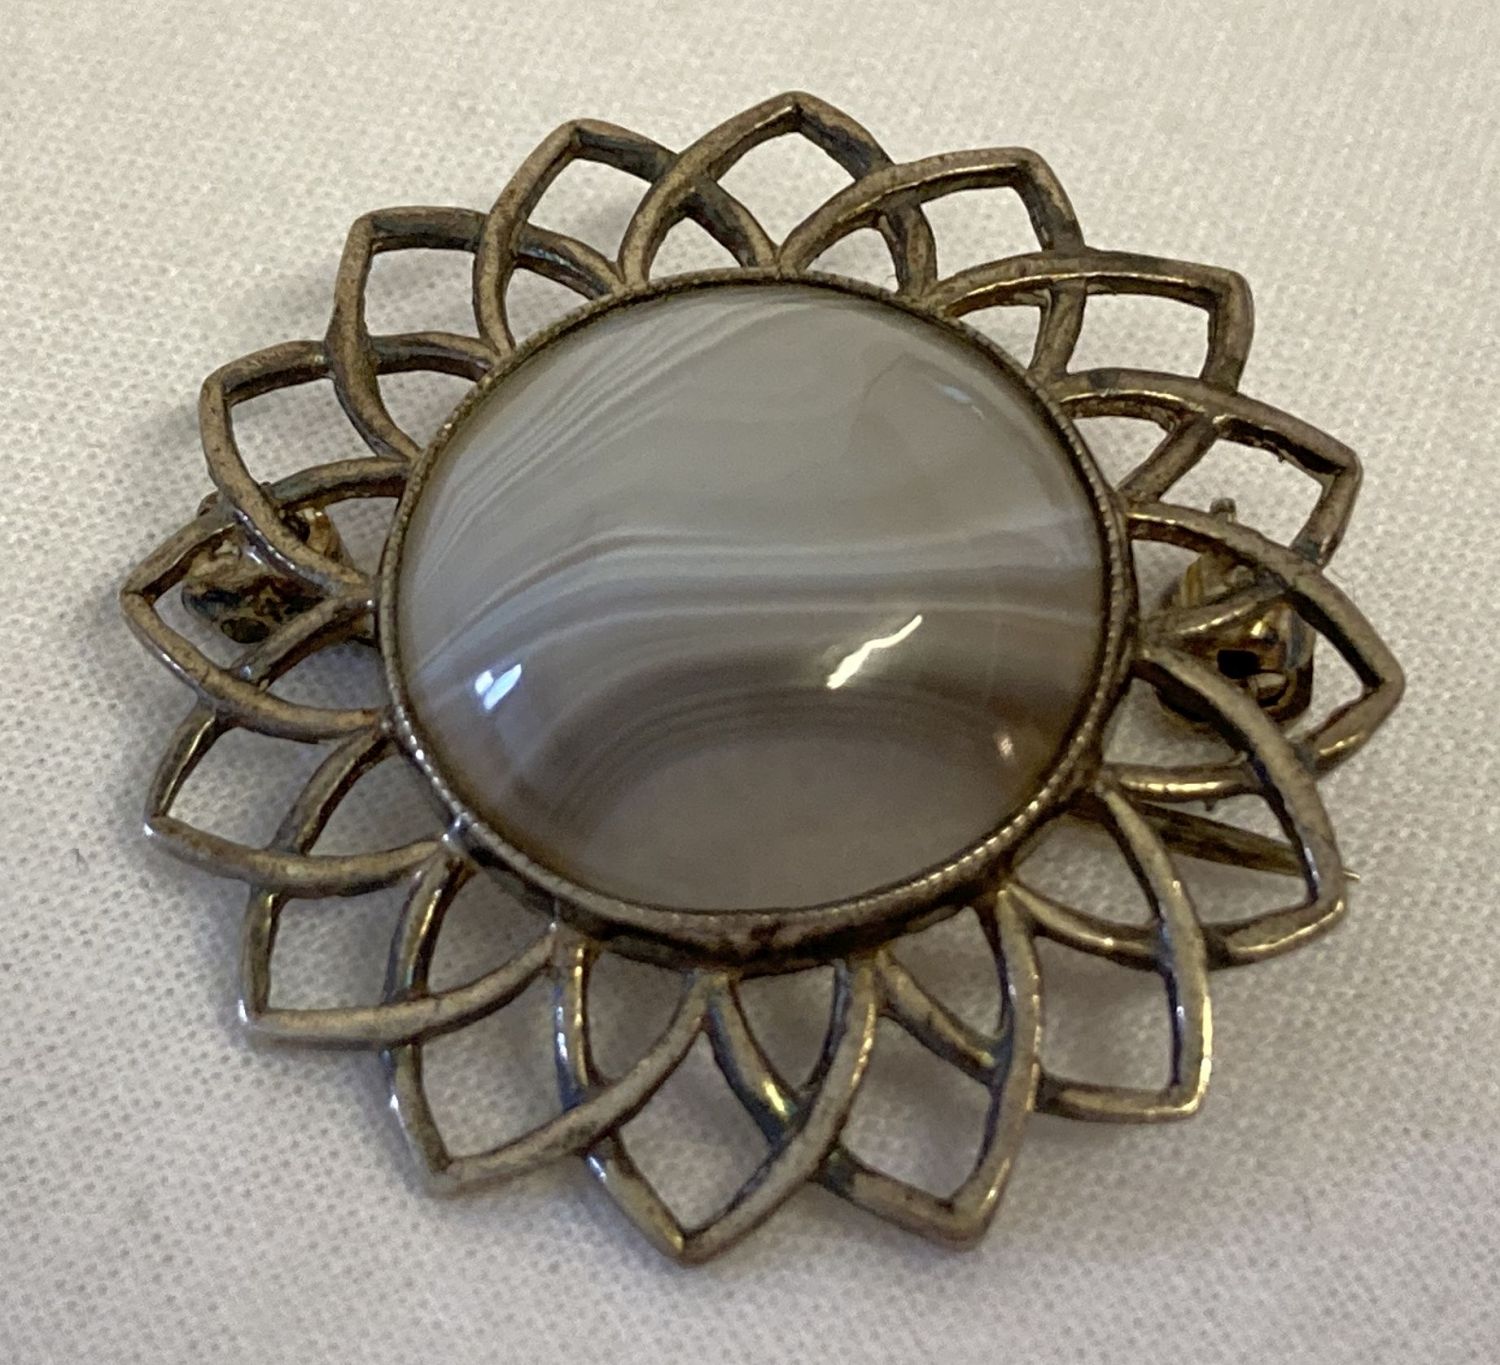 A vintage silver Iona brooch in flower design, set with central white and grey natural agate.